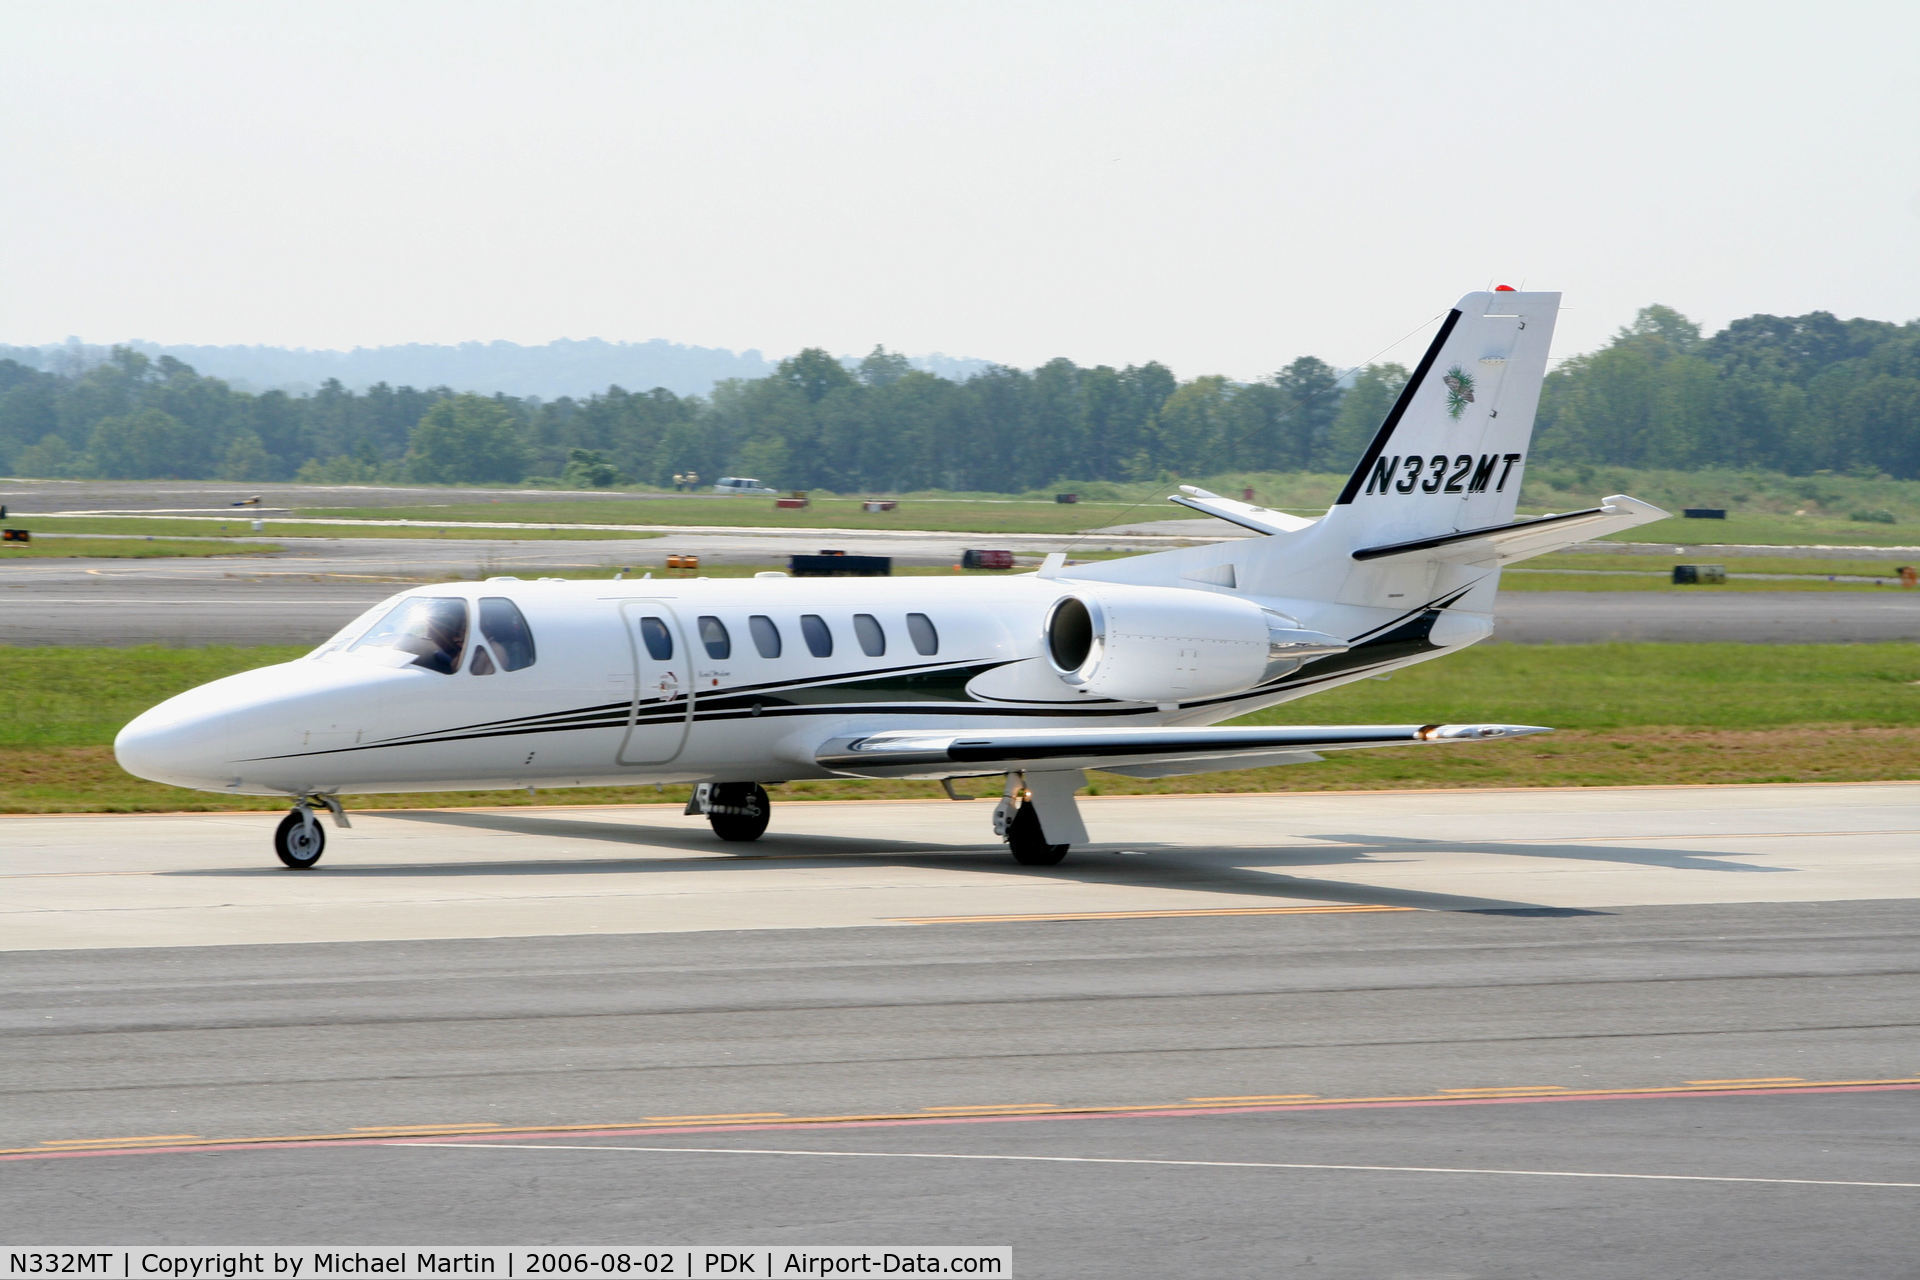 N332MT, 2005 Cessna 550 C/N 550-1105, Taxing to Epps Air Service